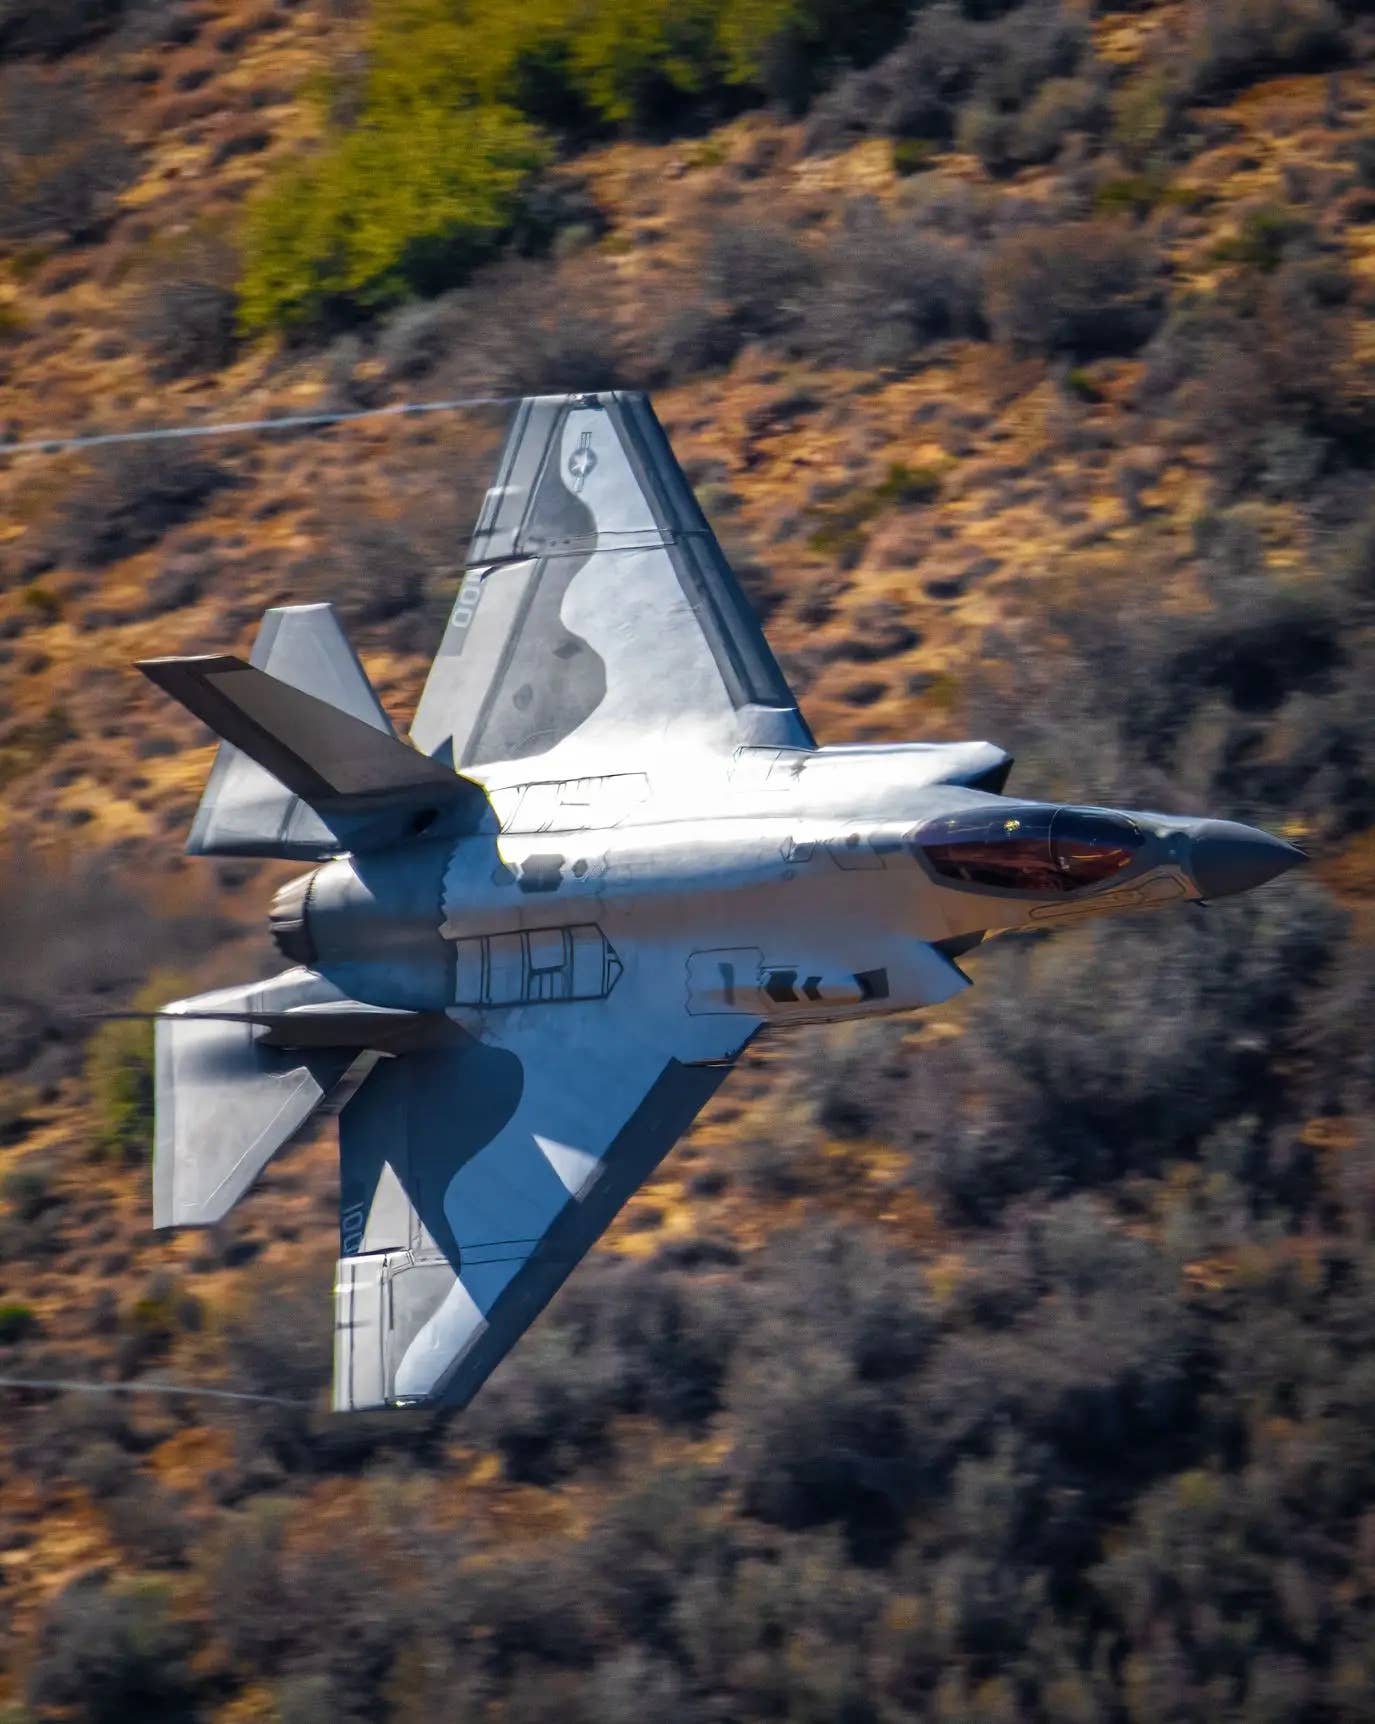 Months ago, another Navy test F-35C from VX-9 appeared with its own 'chrome skin' that looked similar to that worn by the first 'chrome Raptor.' Credit: <em>Elijah Delgadillo&nbsp;</em>